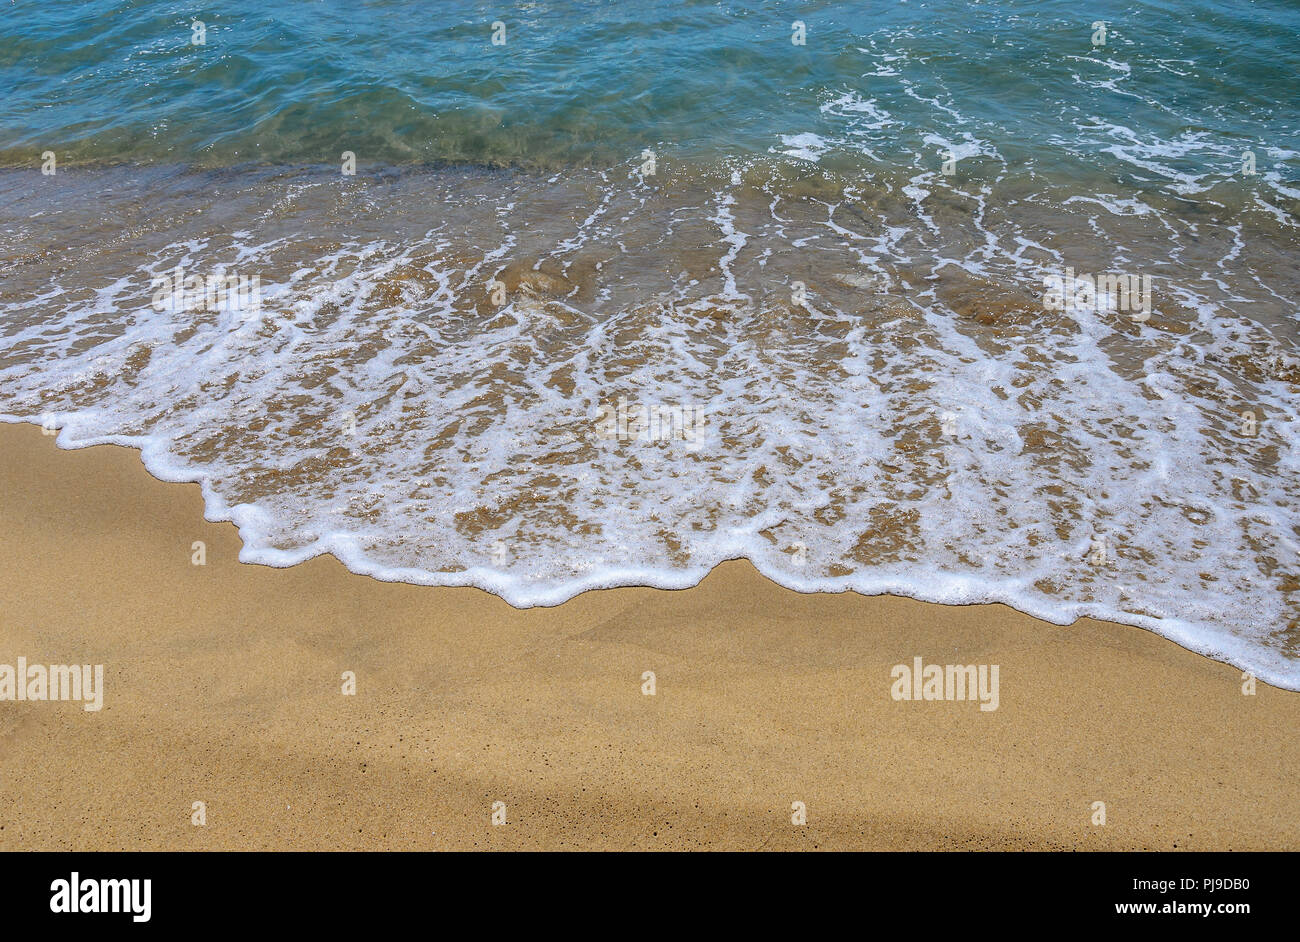 Wet sand on the beach. A part of the sea is visible. Stock Photo